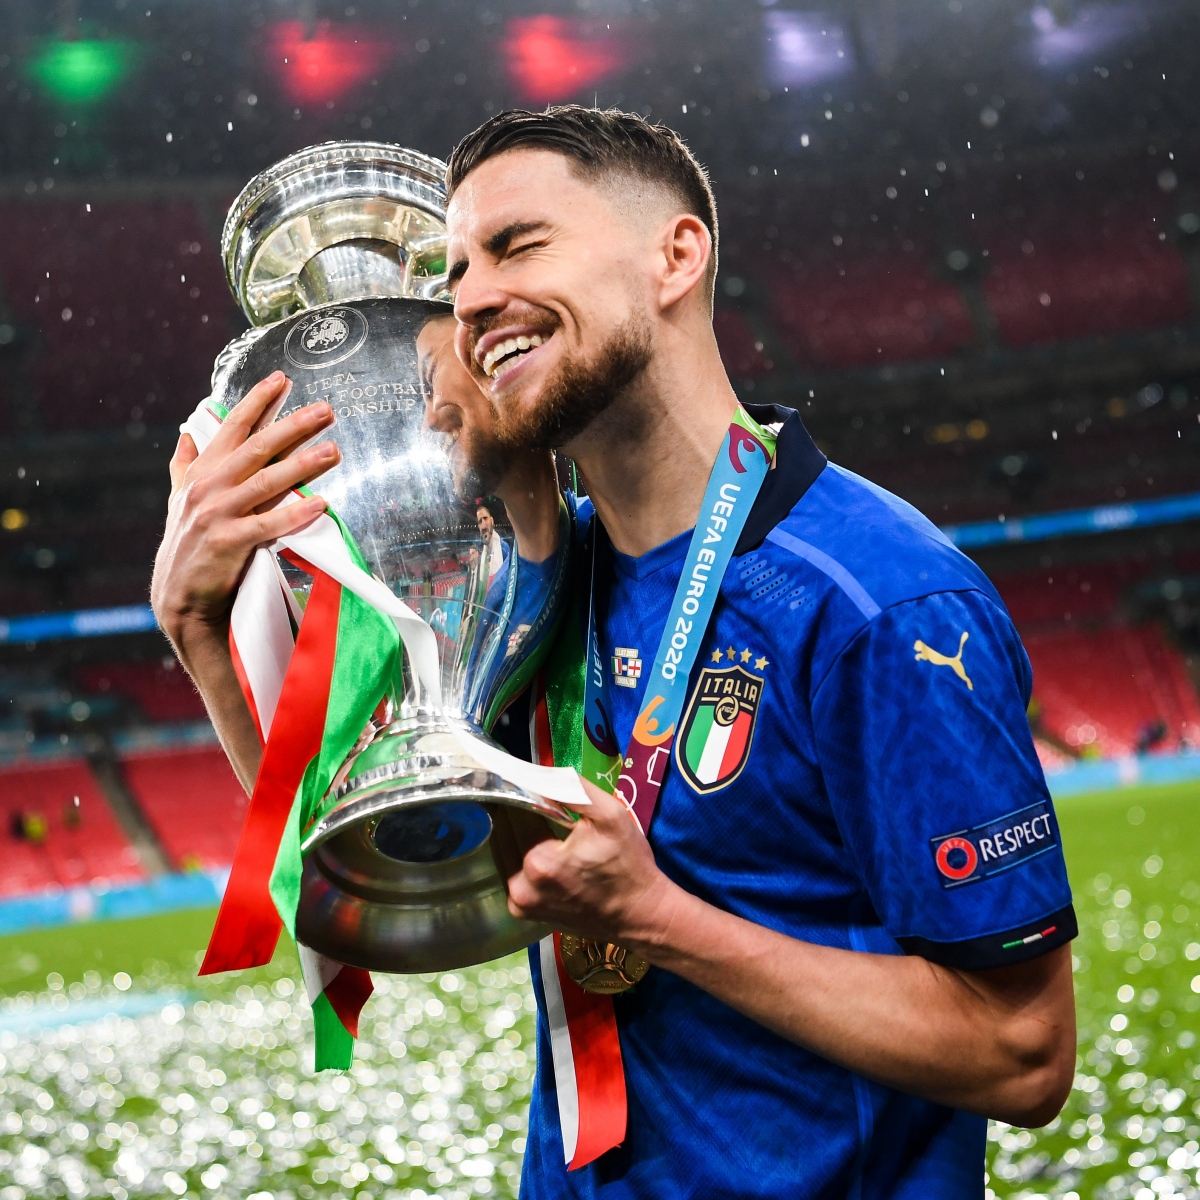 can canh Dt italia nang cup, an mung chuc vo dich euro 2021 hinh anh 7